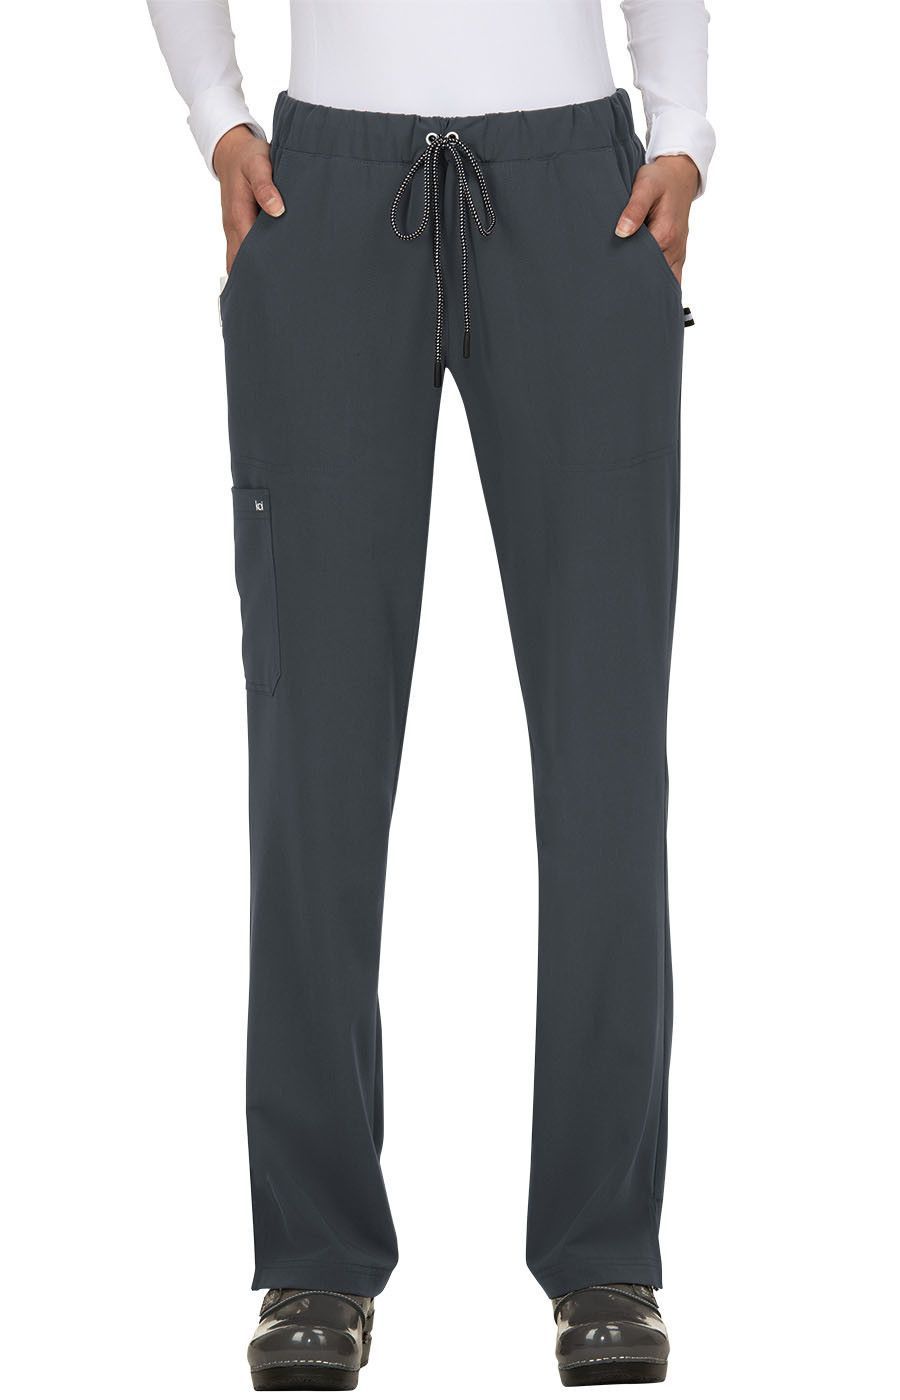 Everyday Hero Pant tall by KOI XS-XL / Charcoal